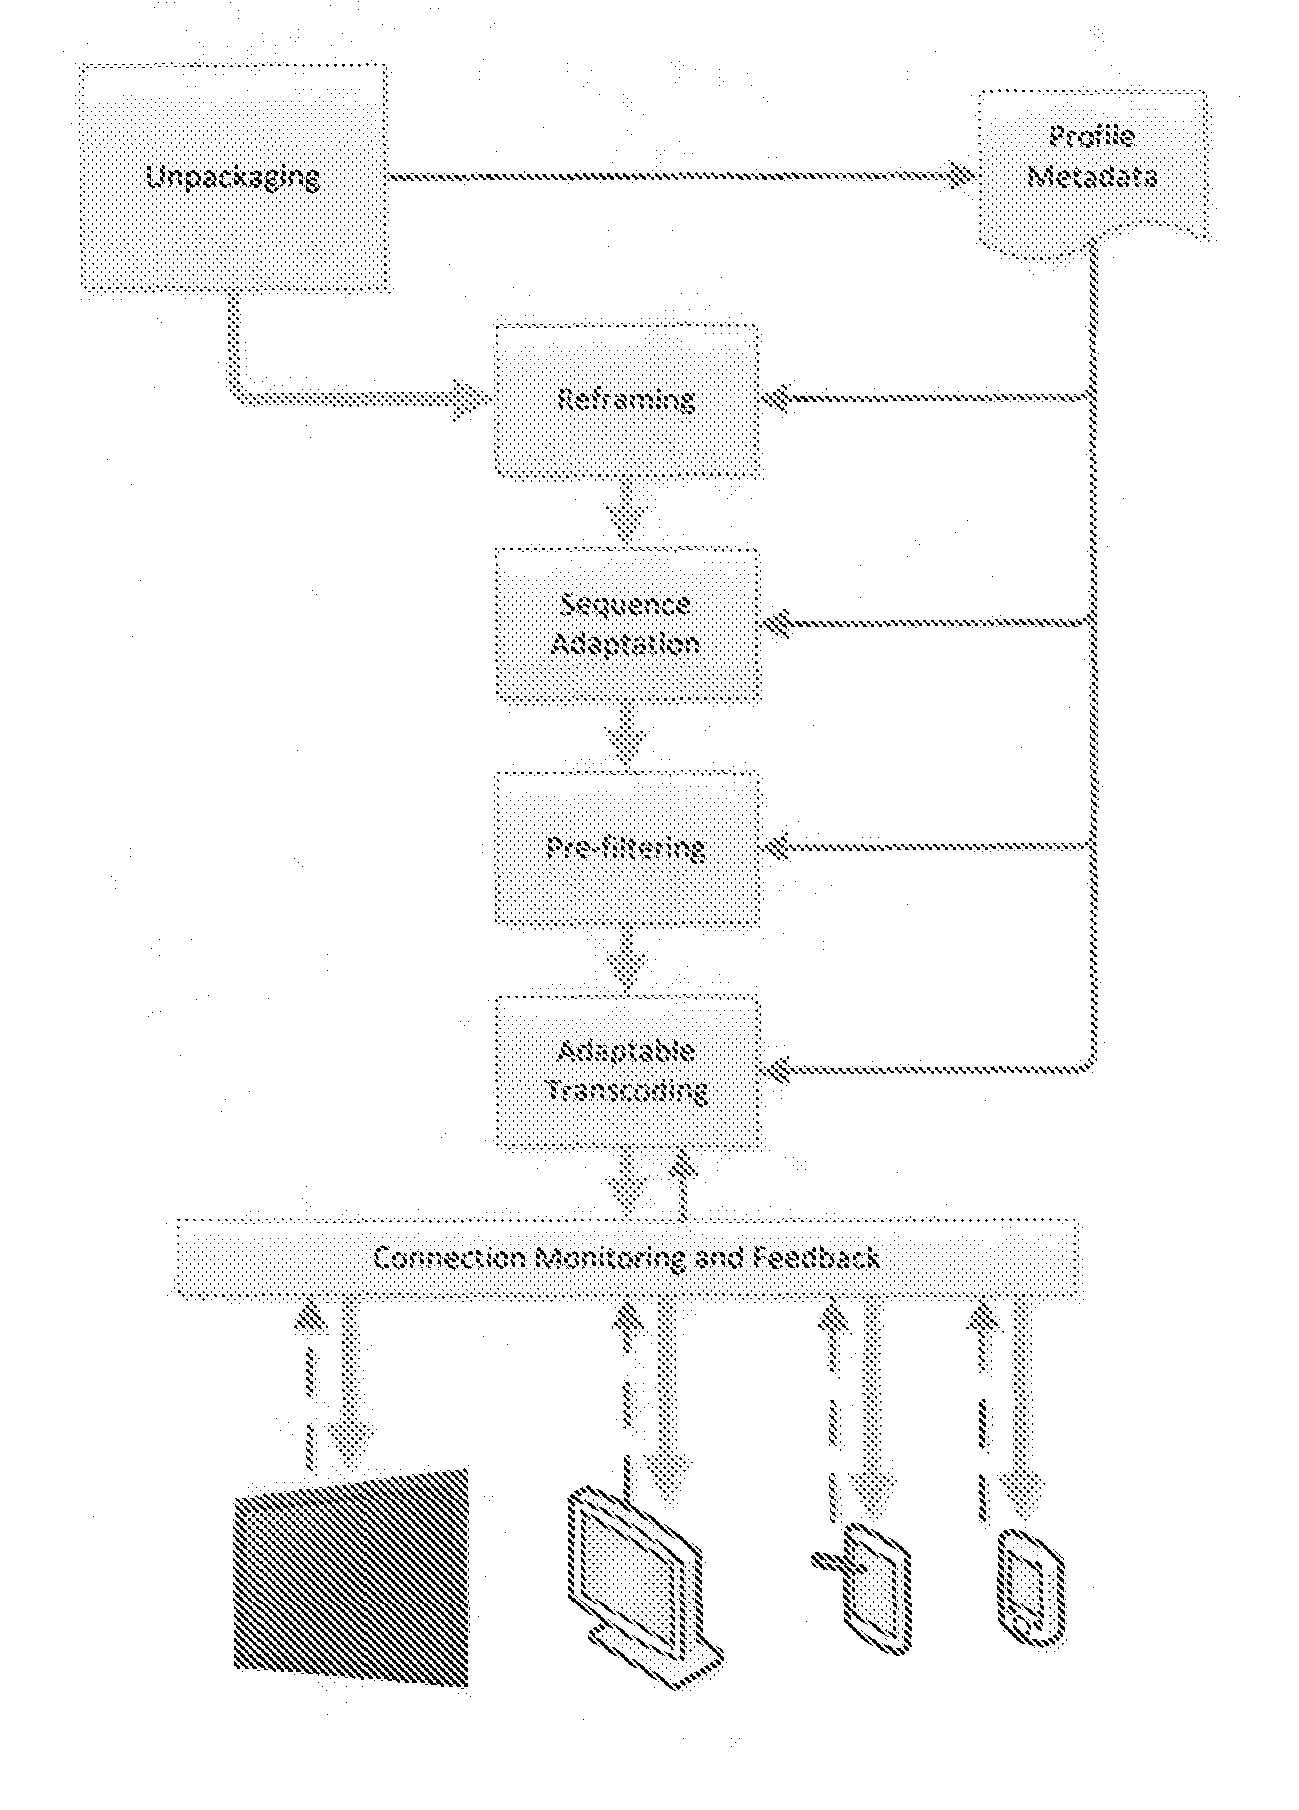 System and method for enhanced remote transcoding using content profiling